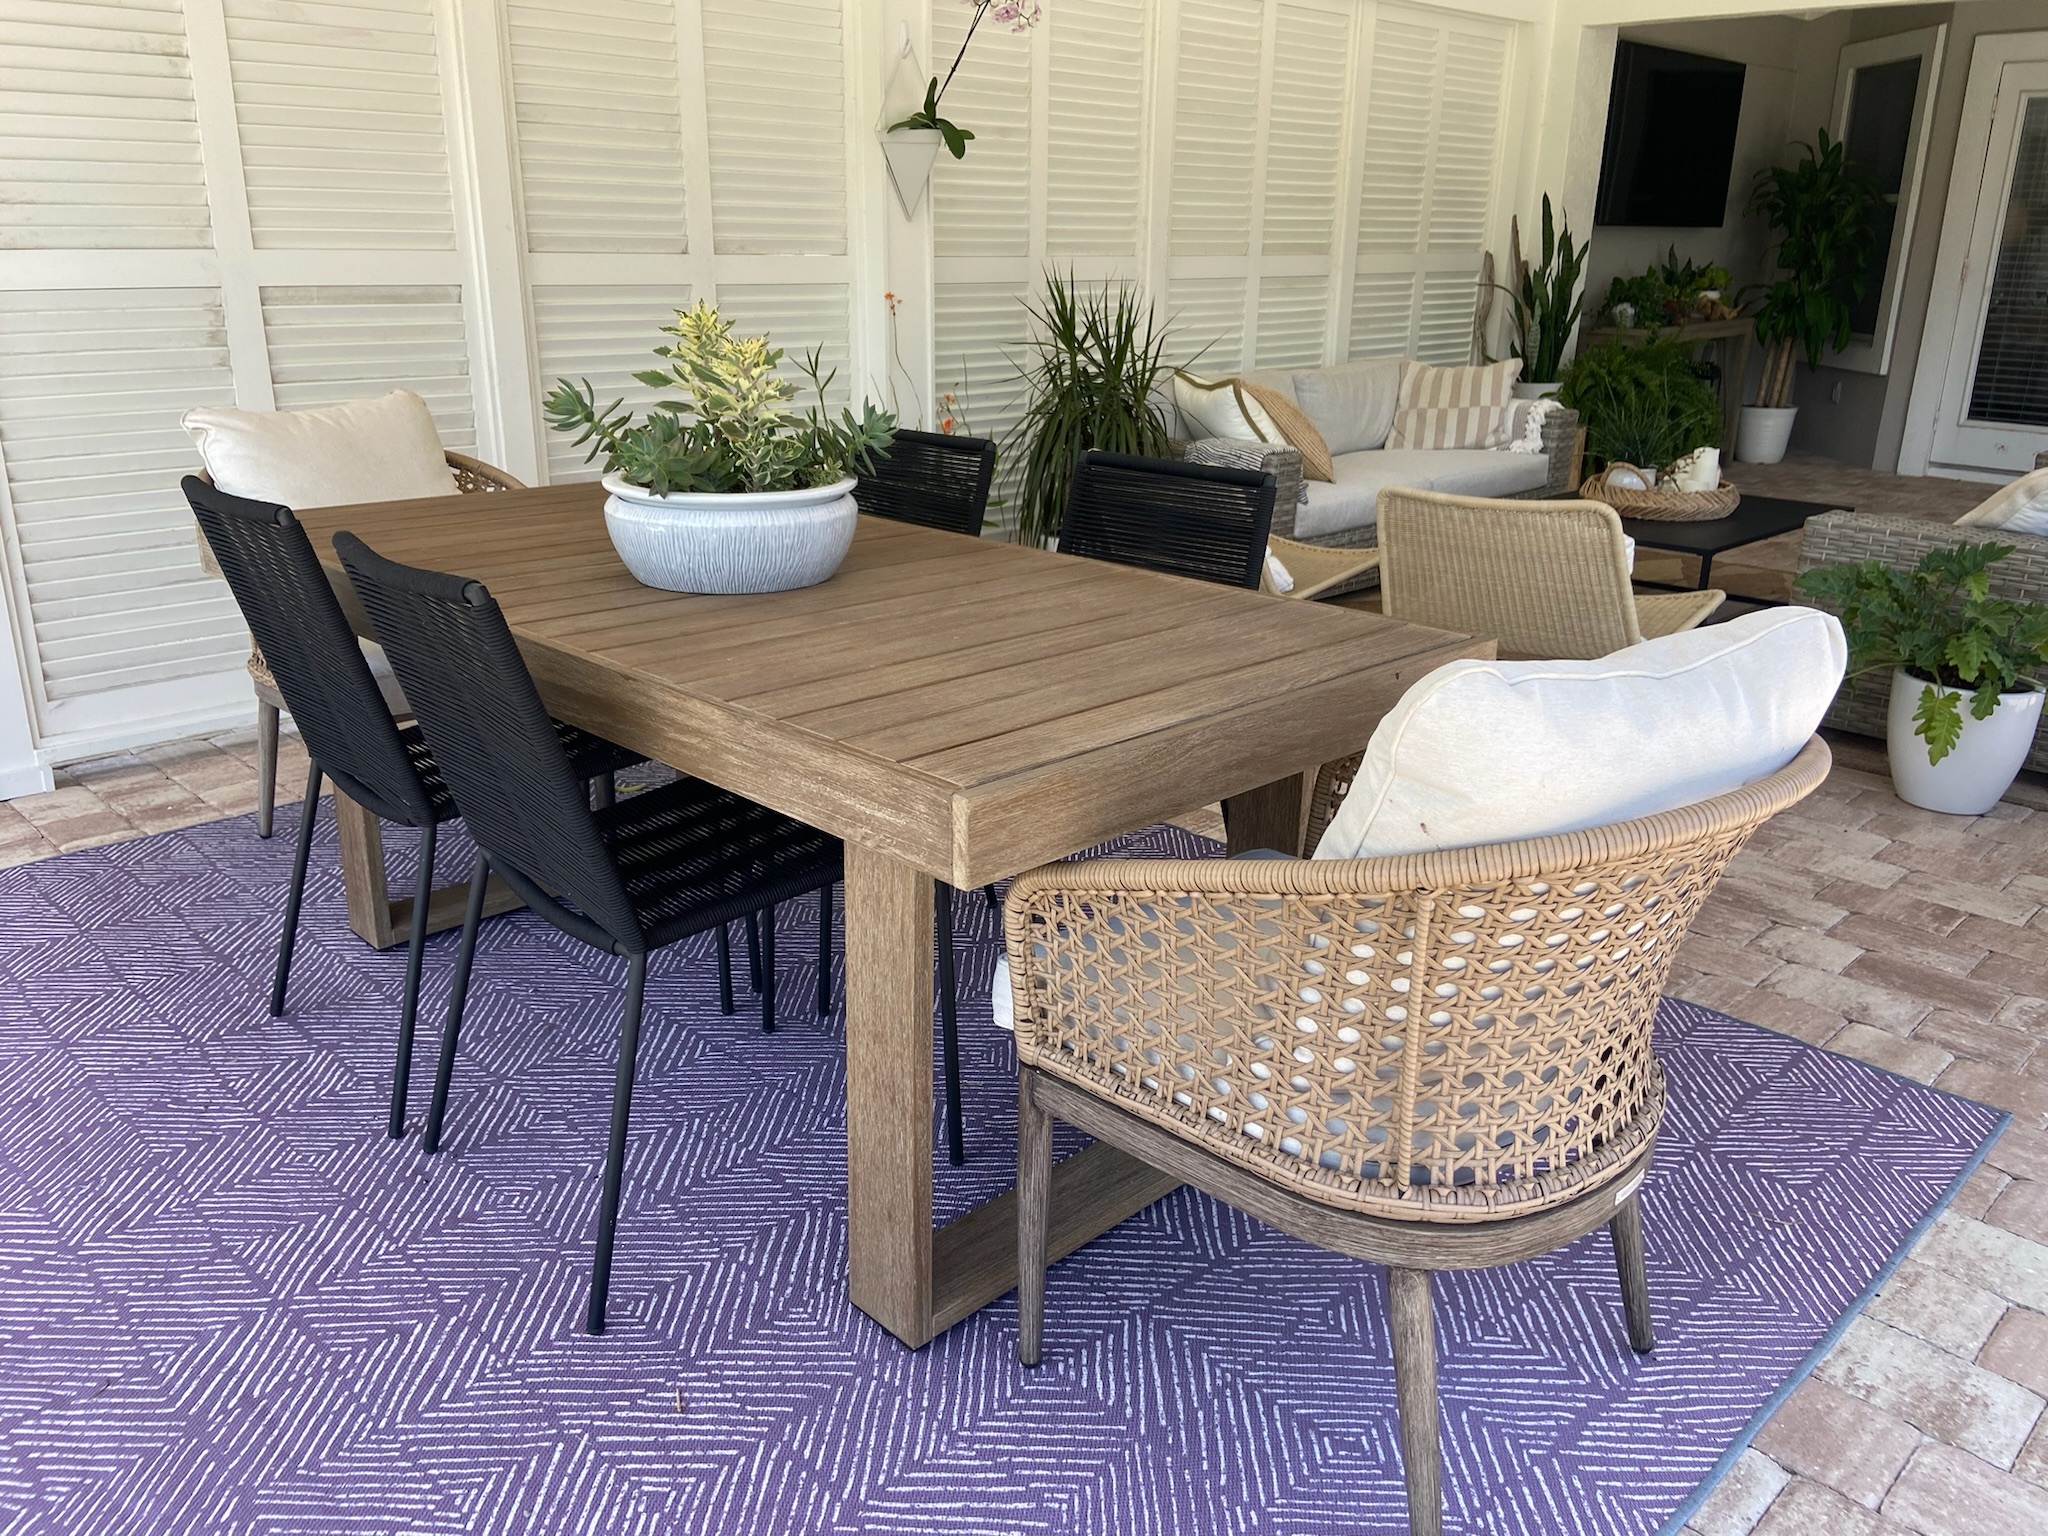 This gorgeous patio space is the perfect spot to sit and enjoy the outdoors. A large wooden table and a mixture of chairs sits on top a colorful rug. 